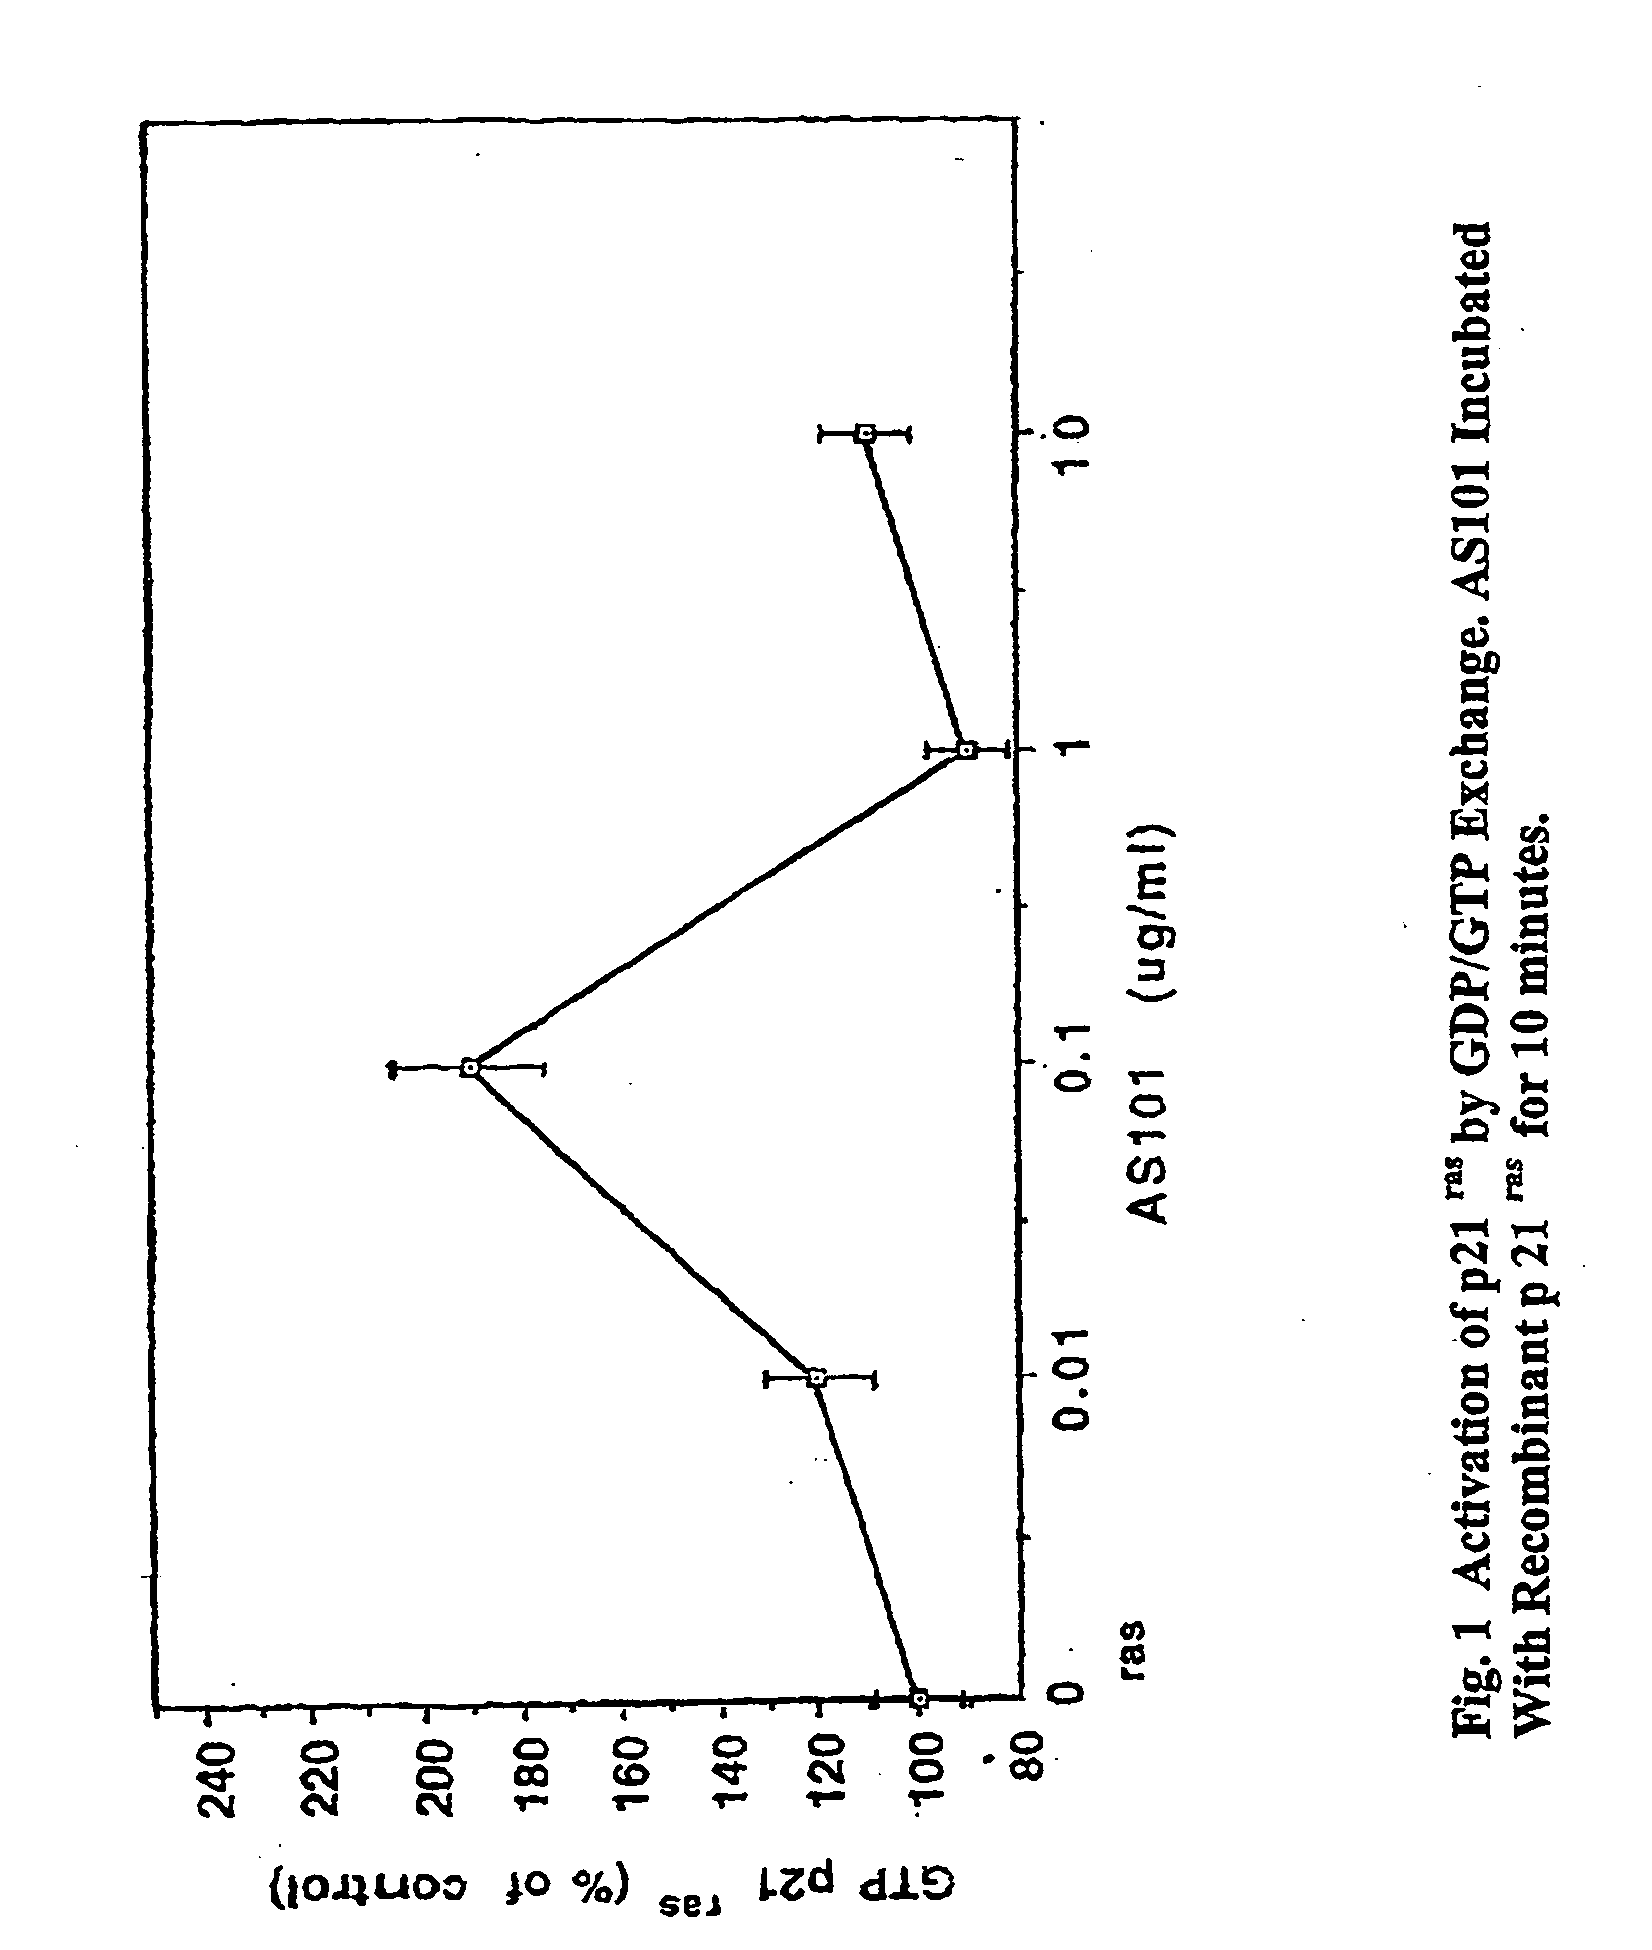 Use of tellurium containing compounds as nerve protecting agents